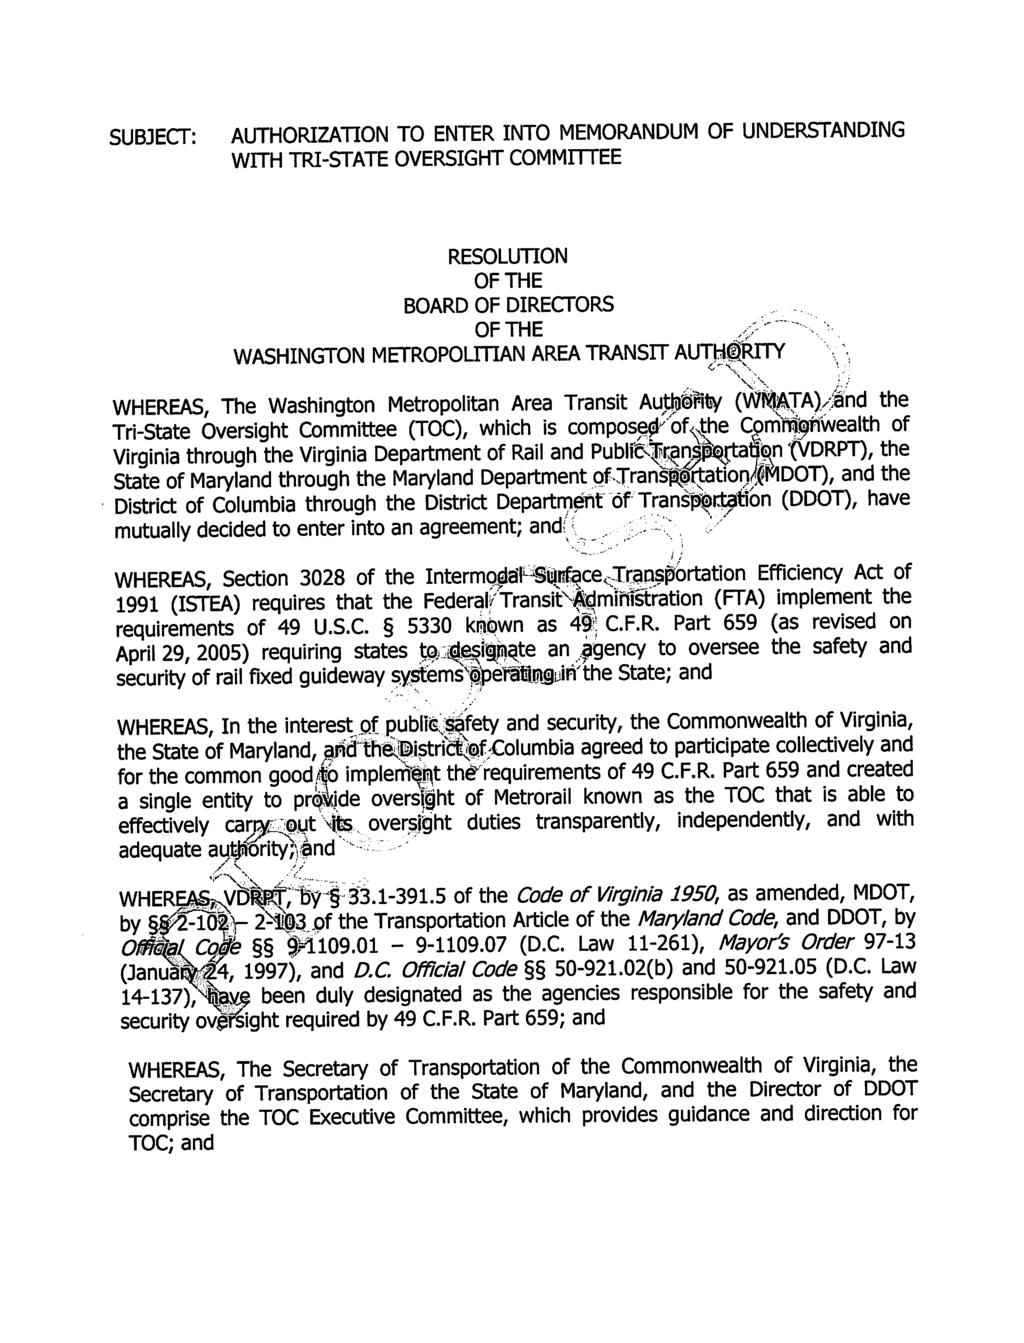 SUBJECT: AUTHORIZATION TO ENTER INTO MEMORANDUM OF UNDERSTANDING WITH TRI-STATE OVERSIGHT COMMITTEE RESOLUTION OF THE BOARD OF DIRECTORS OF THE,^v -,\ WASHINGTON METROPOLITAN AREA TRANSIT AUTHORITY